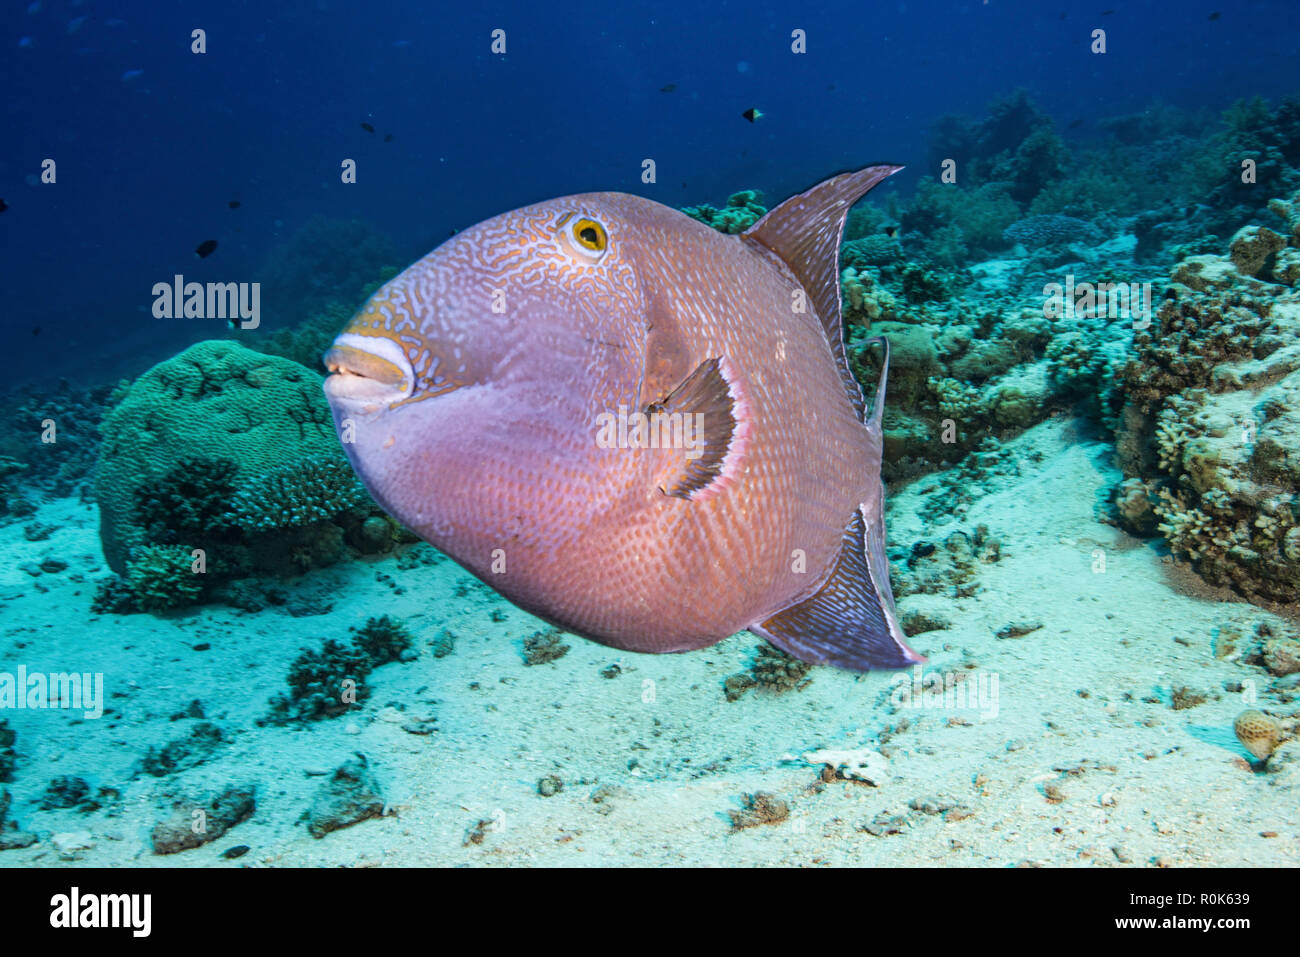 A titan triggerfish aggressively defends it's nest of eggs in the sand. Stock Photo